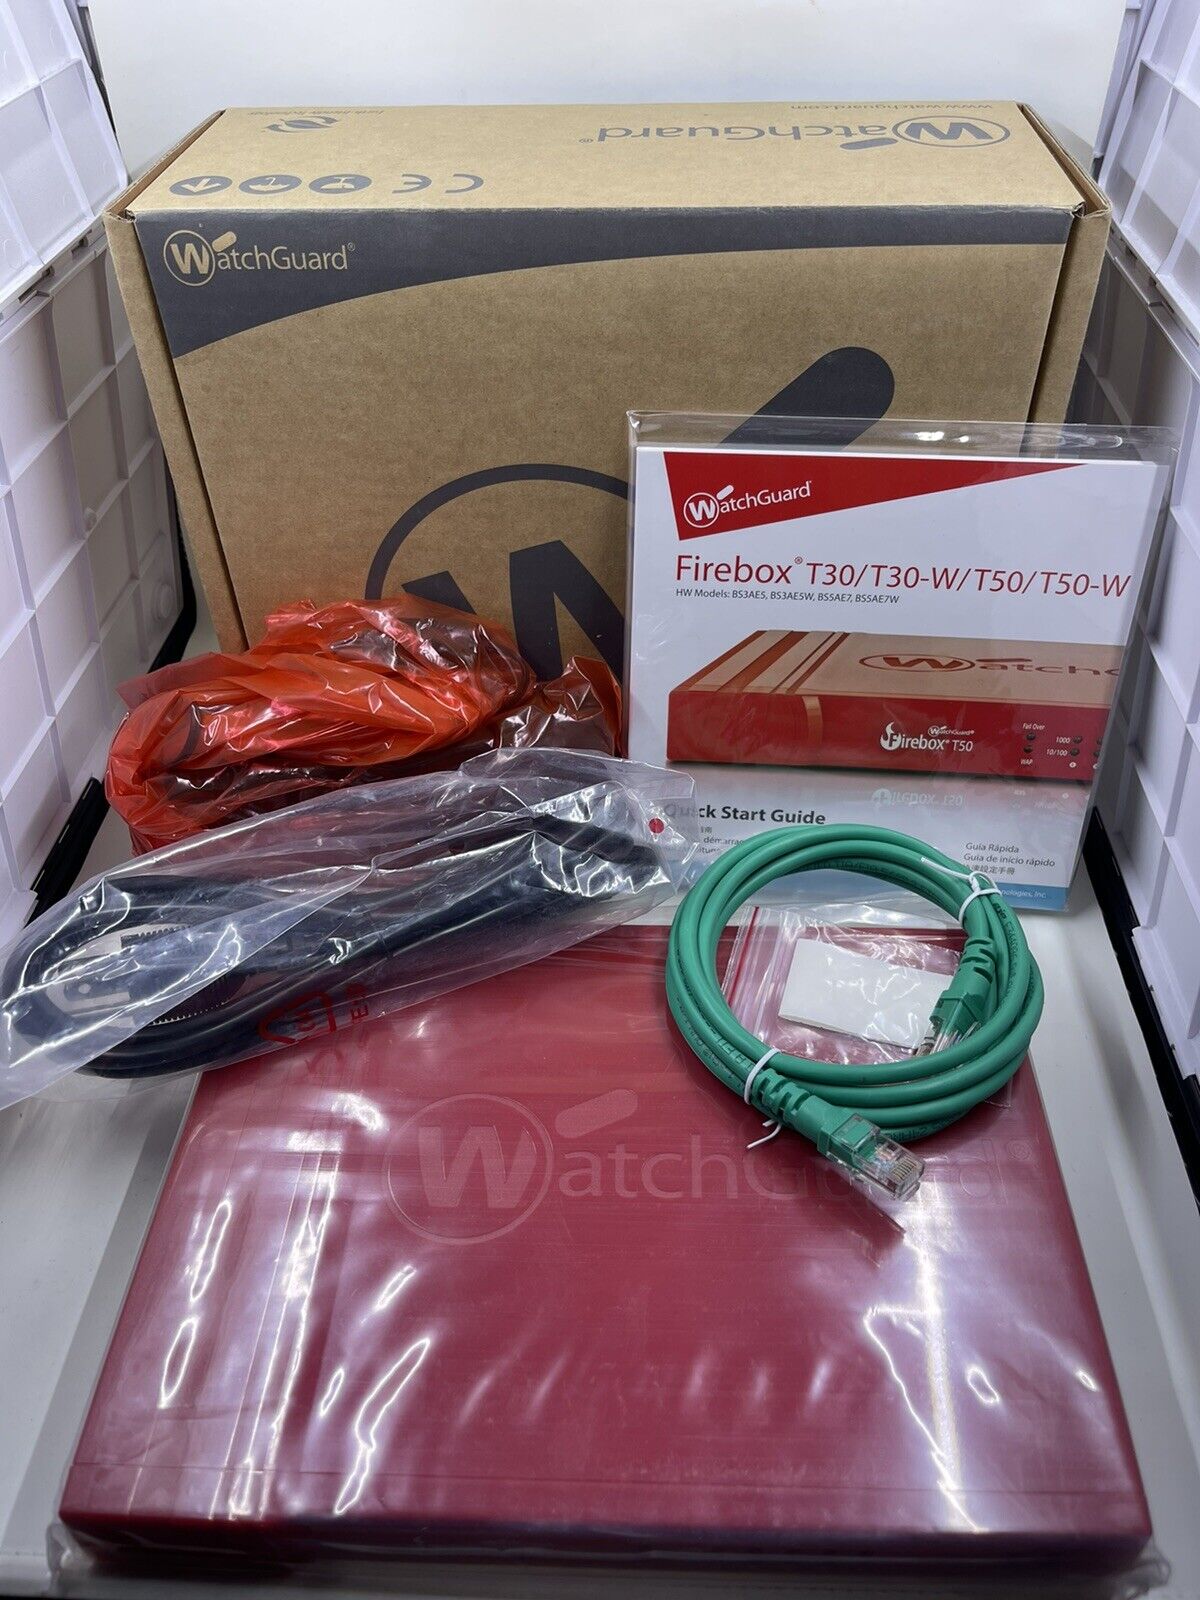 New Sealed Watchguard Firebox T30-W (US) 3 Year Security Suite WGT31083-US